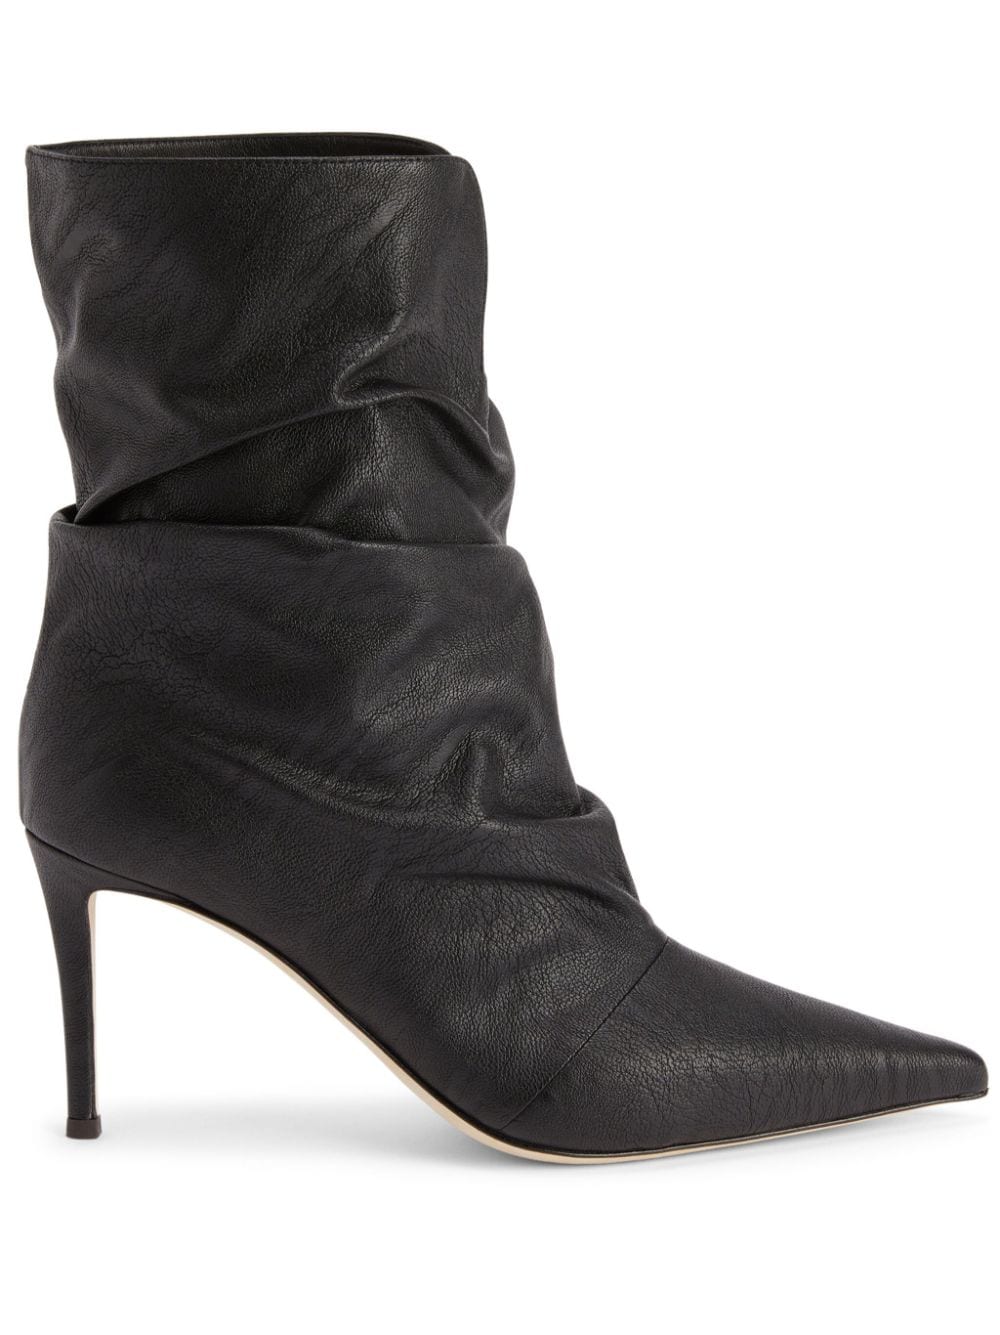 Giuseppe Zanotti Yunah 85mm Leather Boots In Black